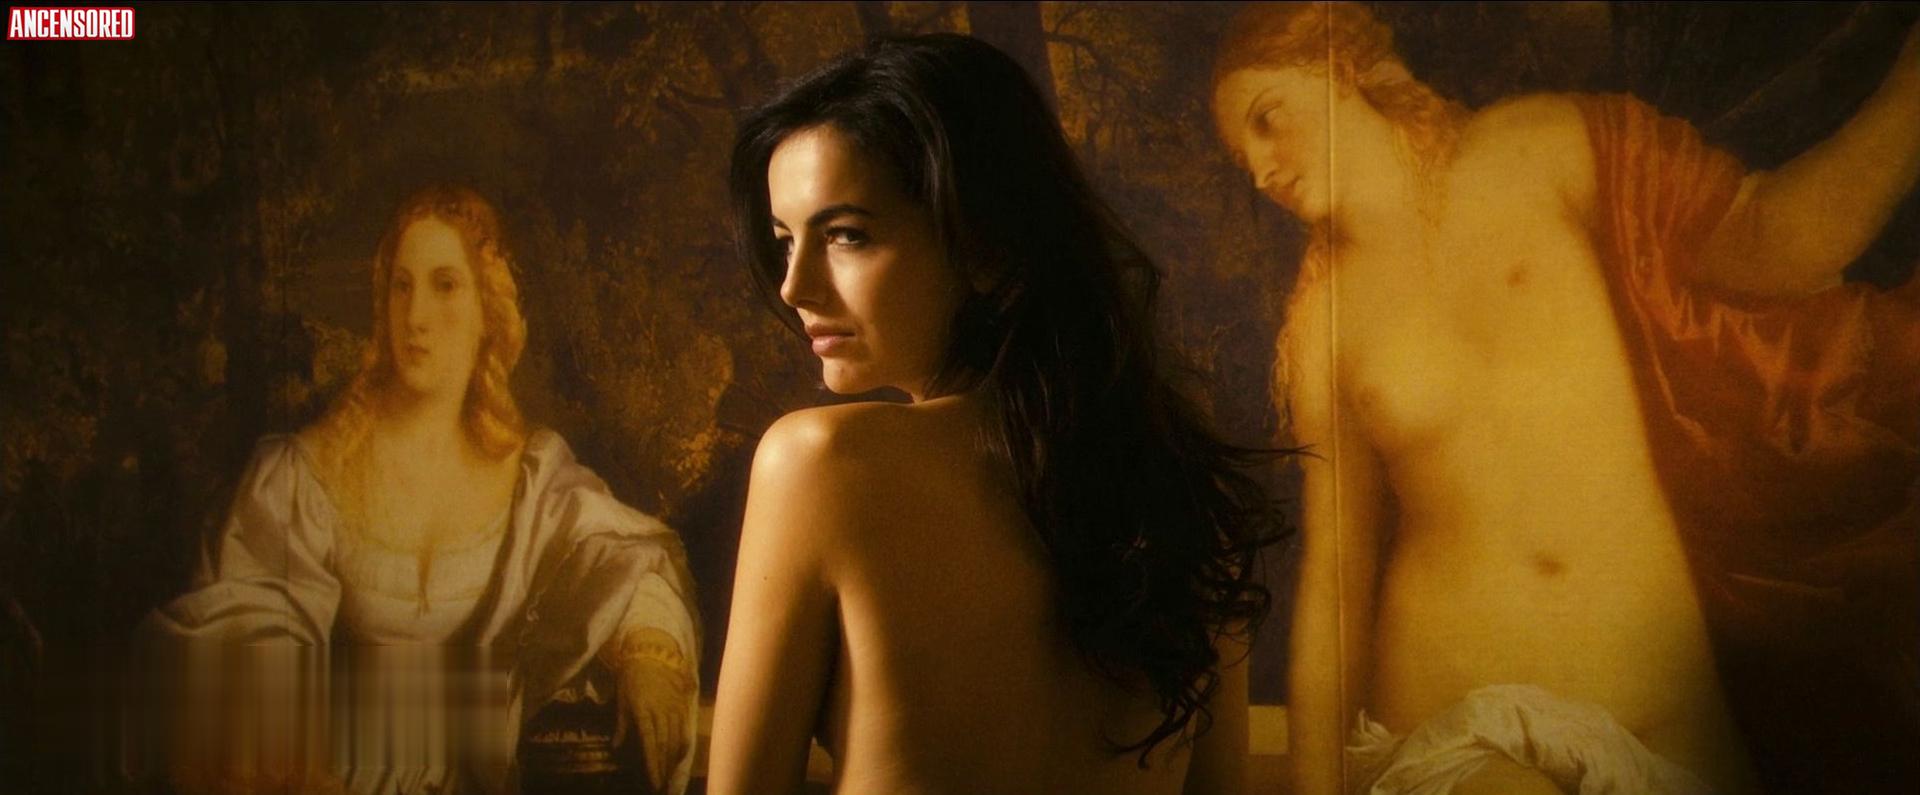 barbara redmond recommends camilla belle nude pictures pic